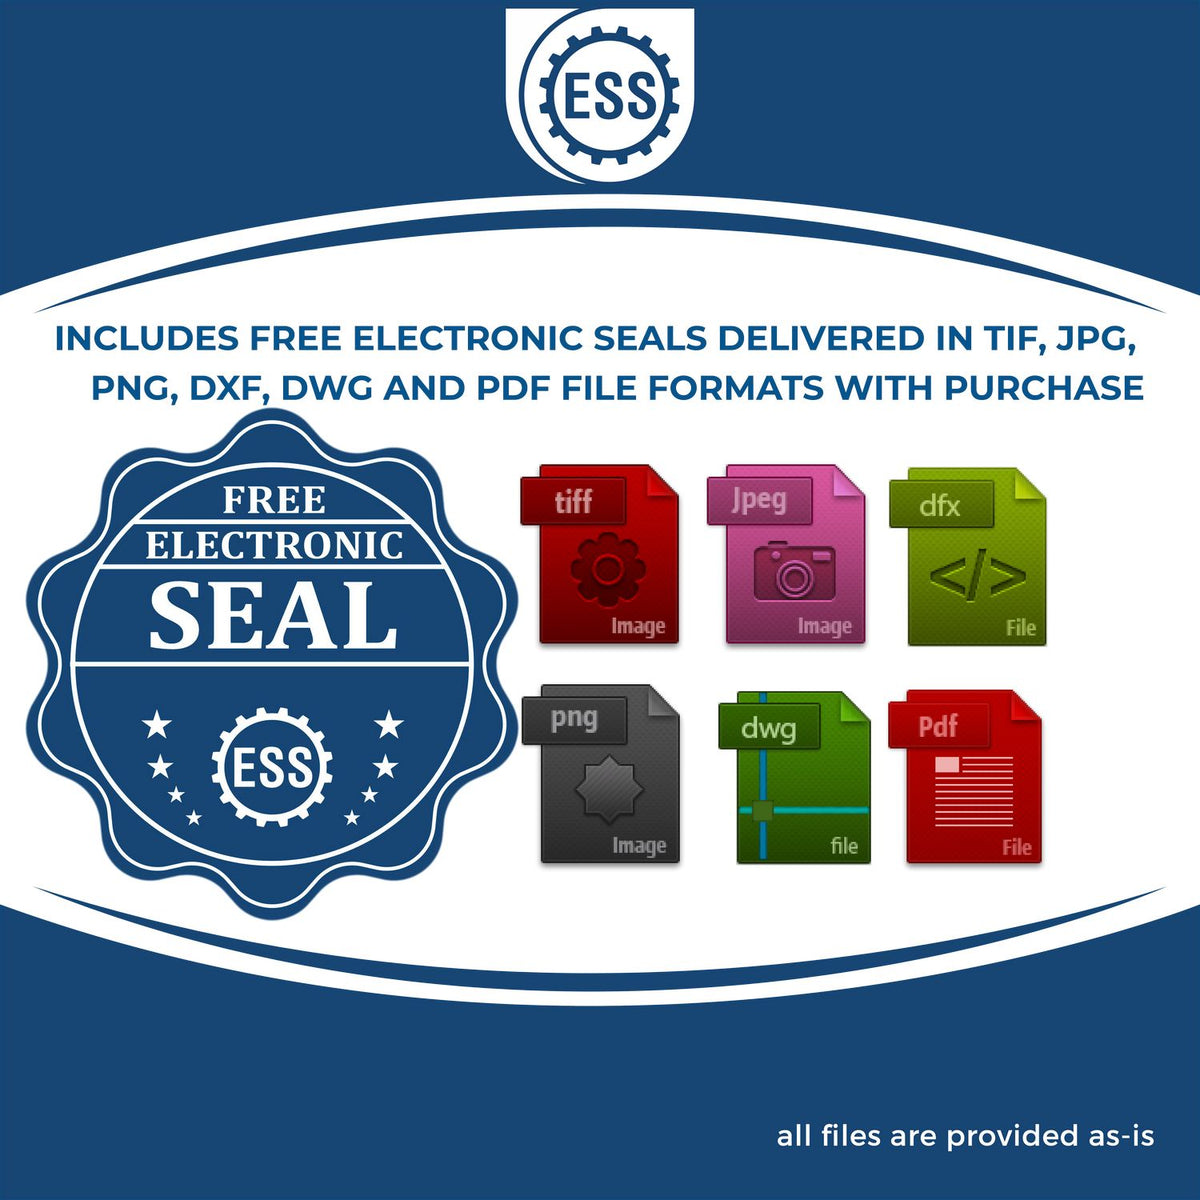 An infographic for the free electronic seal for the Hybrid Indiana Landscape Architect Seal illustrating the different file type icons such as DXF, DWG, TIF, JPG and PNG.